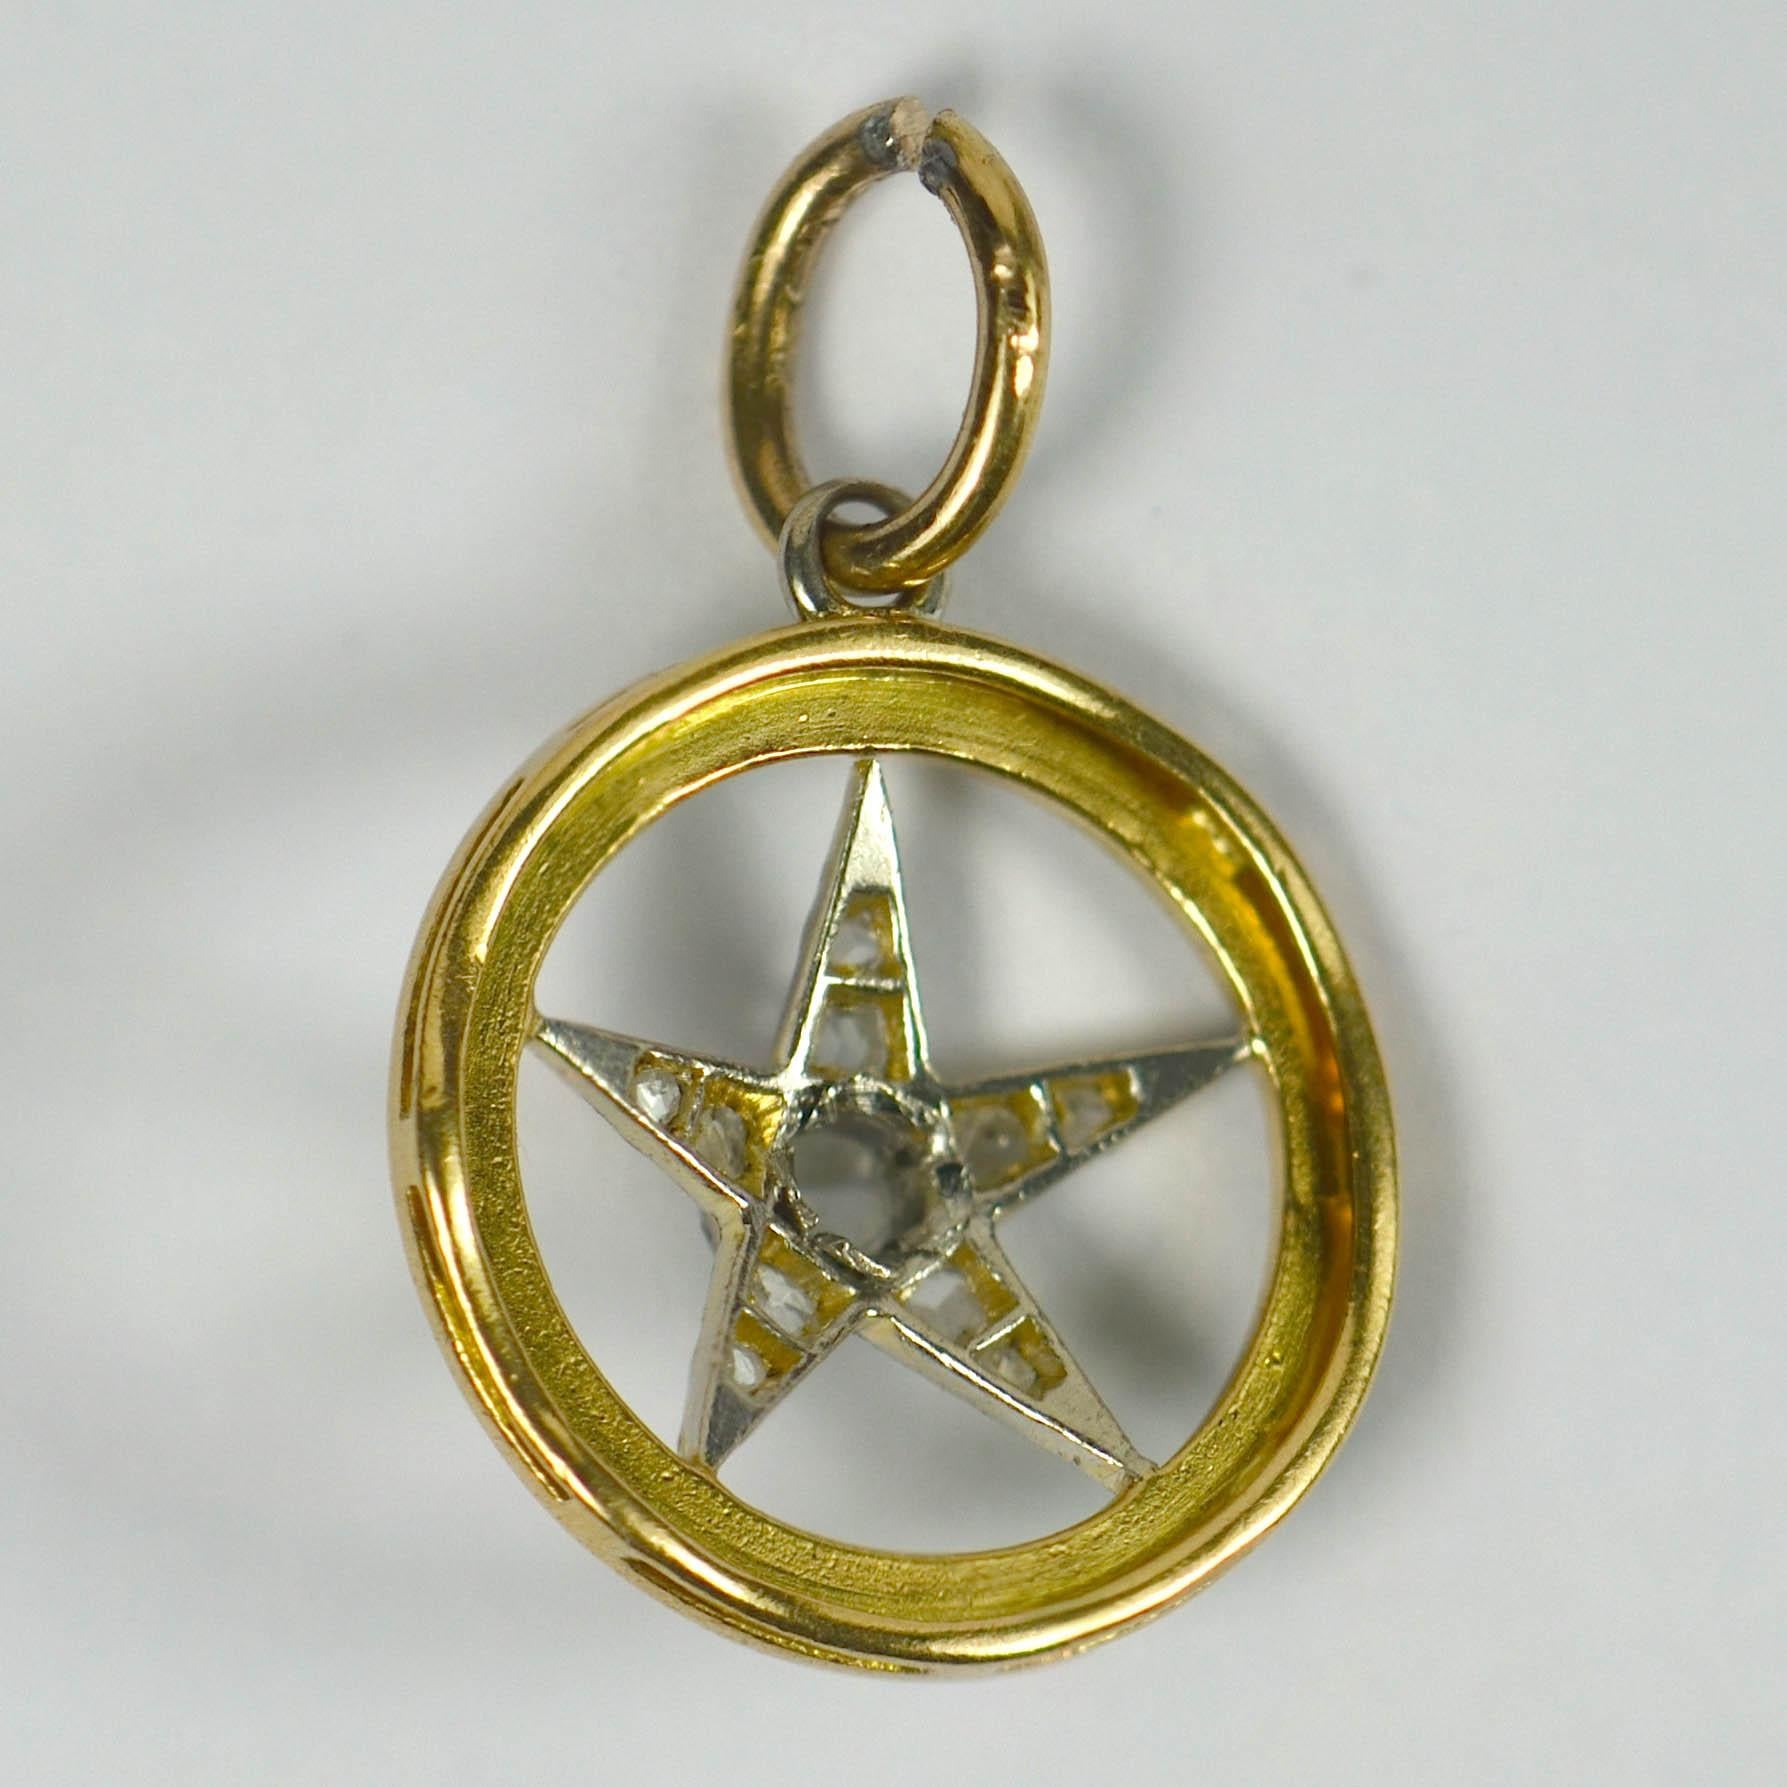 An 18 karat gold pendant charm designed as a green guilloche enamel circle with a platinum star. The five pointed star is set with rose-cut diamonds. 1/2